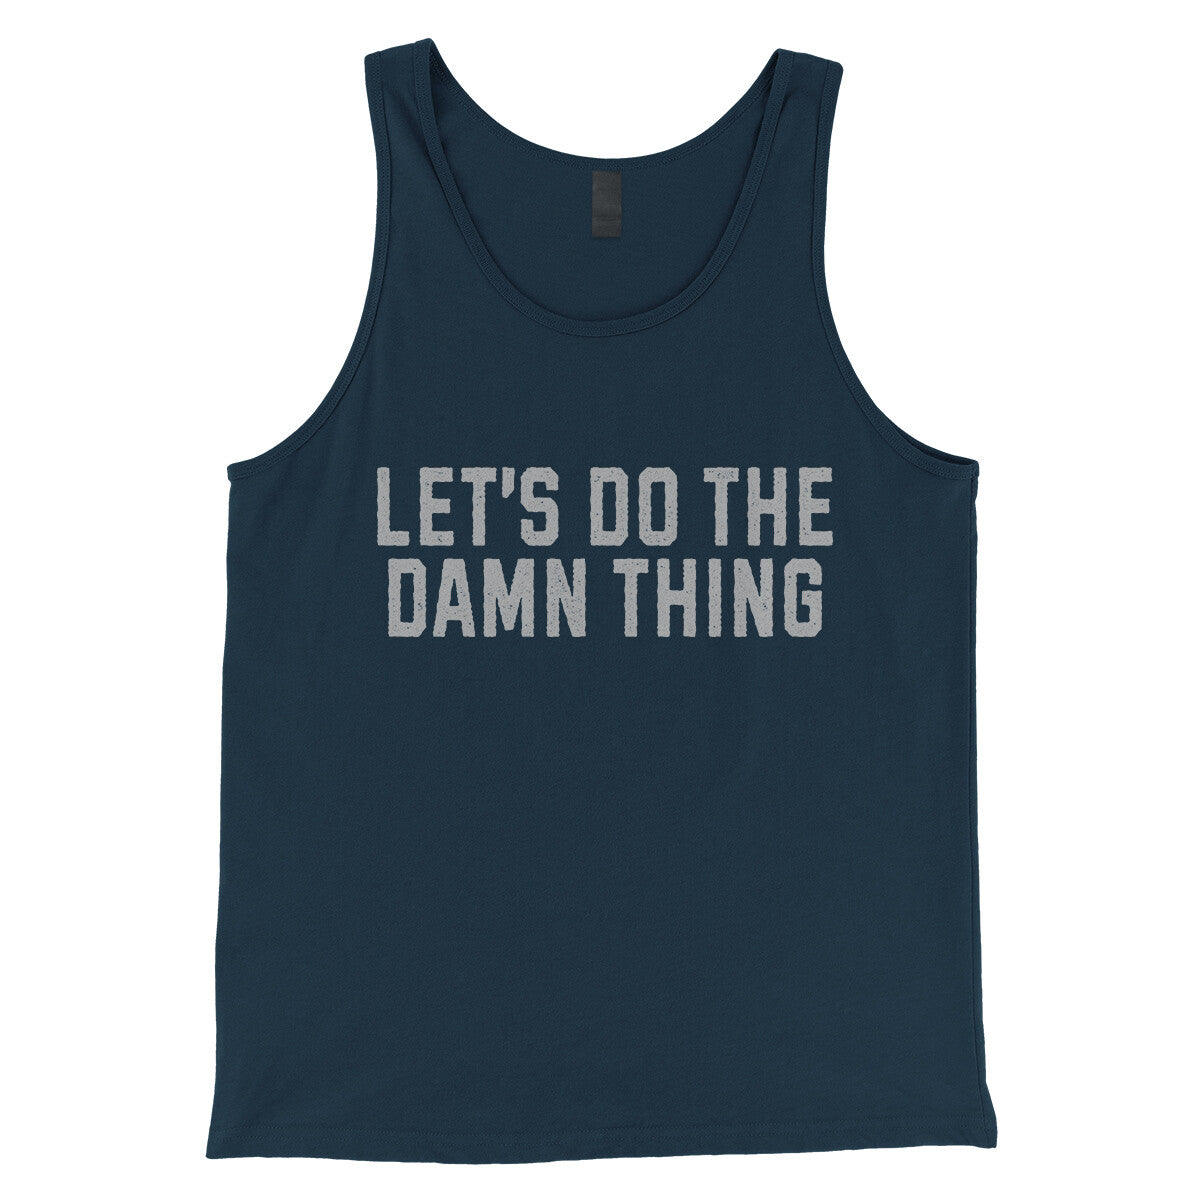 Let’s Do the Damn Thing in Navy Color